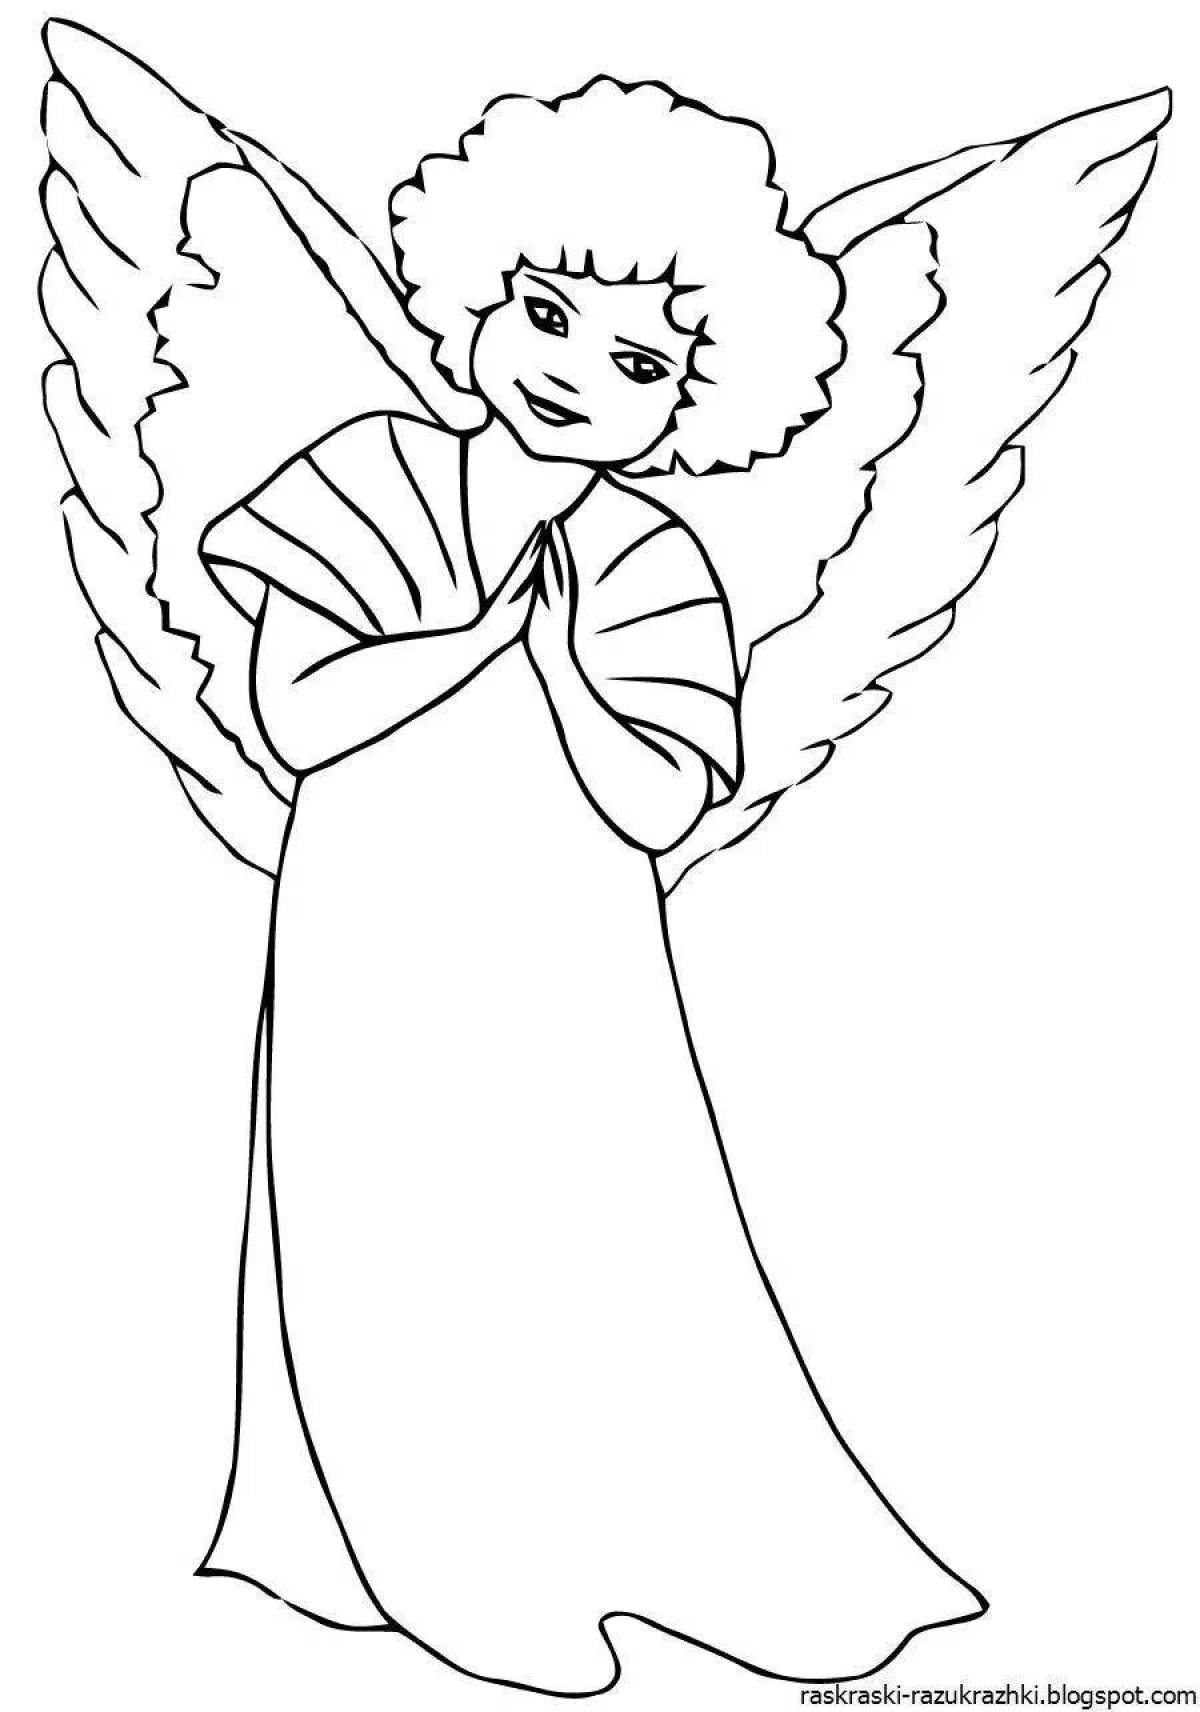 Amazing angel with wings coloring book for kids